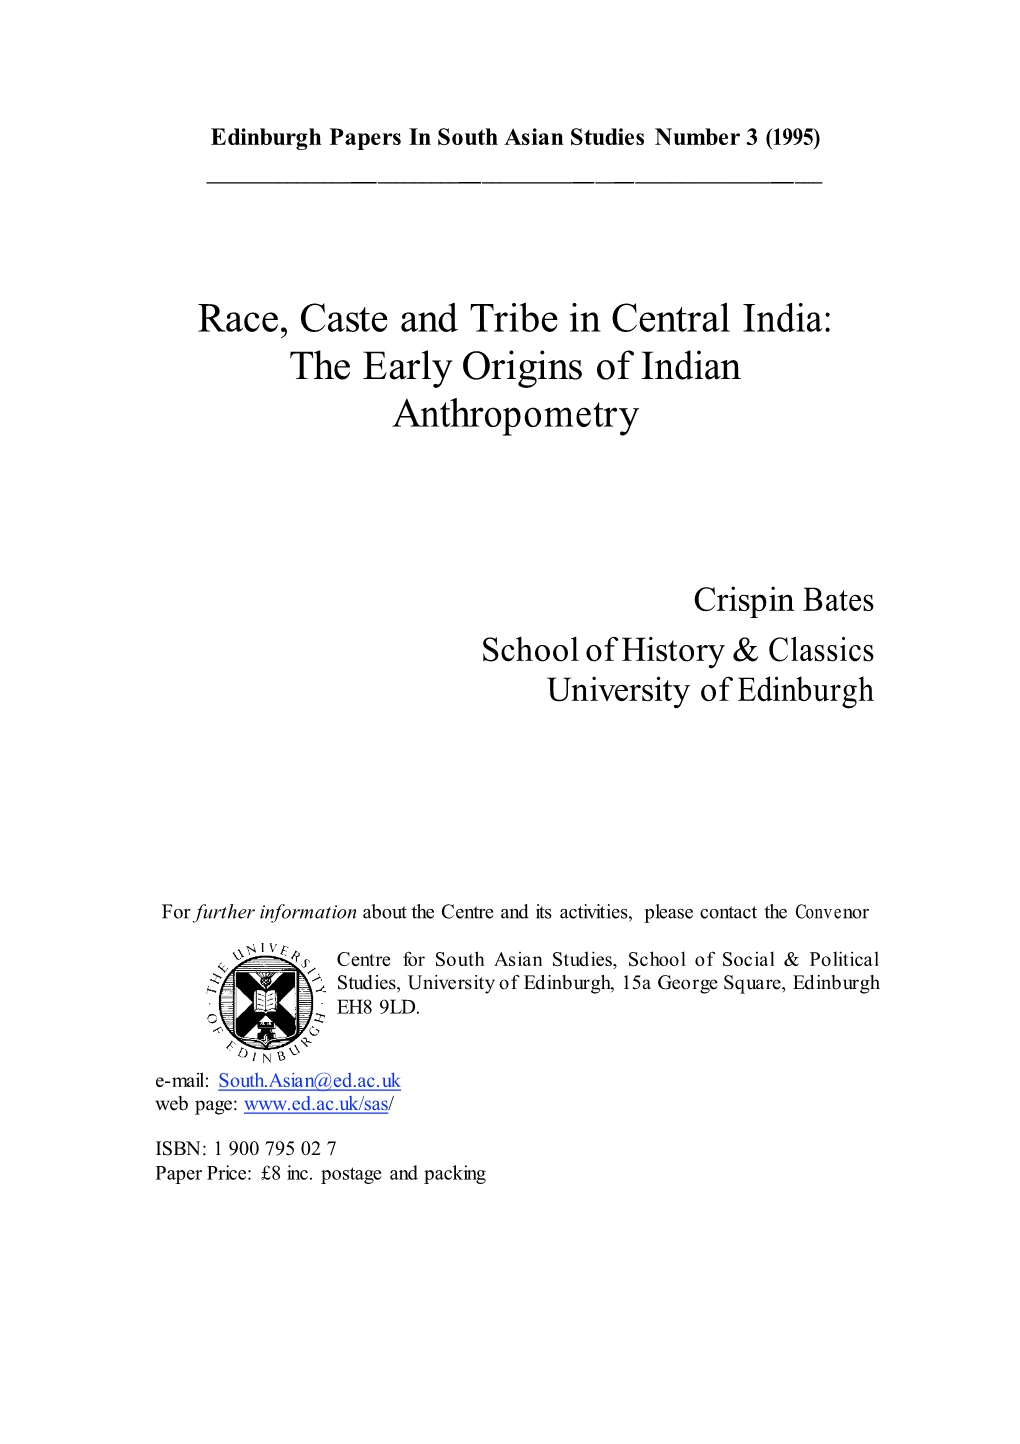 Race, Caste and Tribe in Central India: the Early Origins of Indian Anthropometry